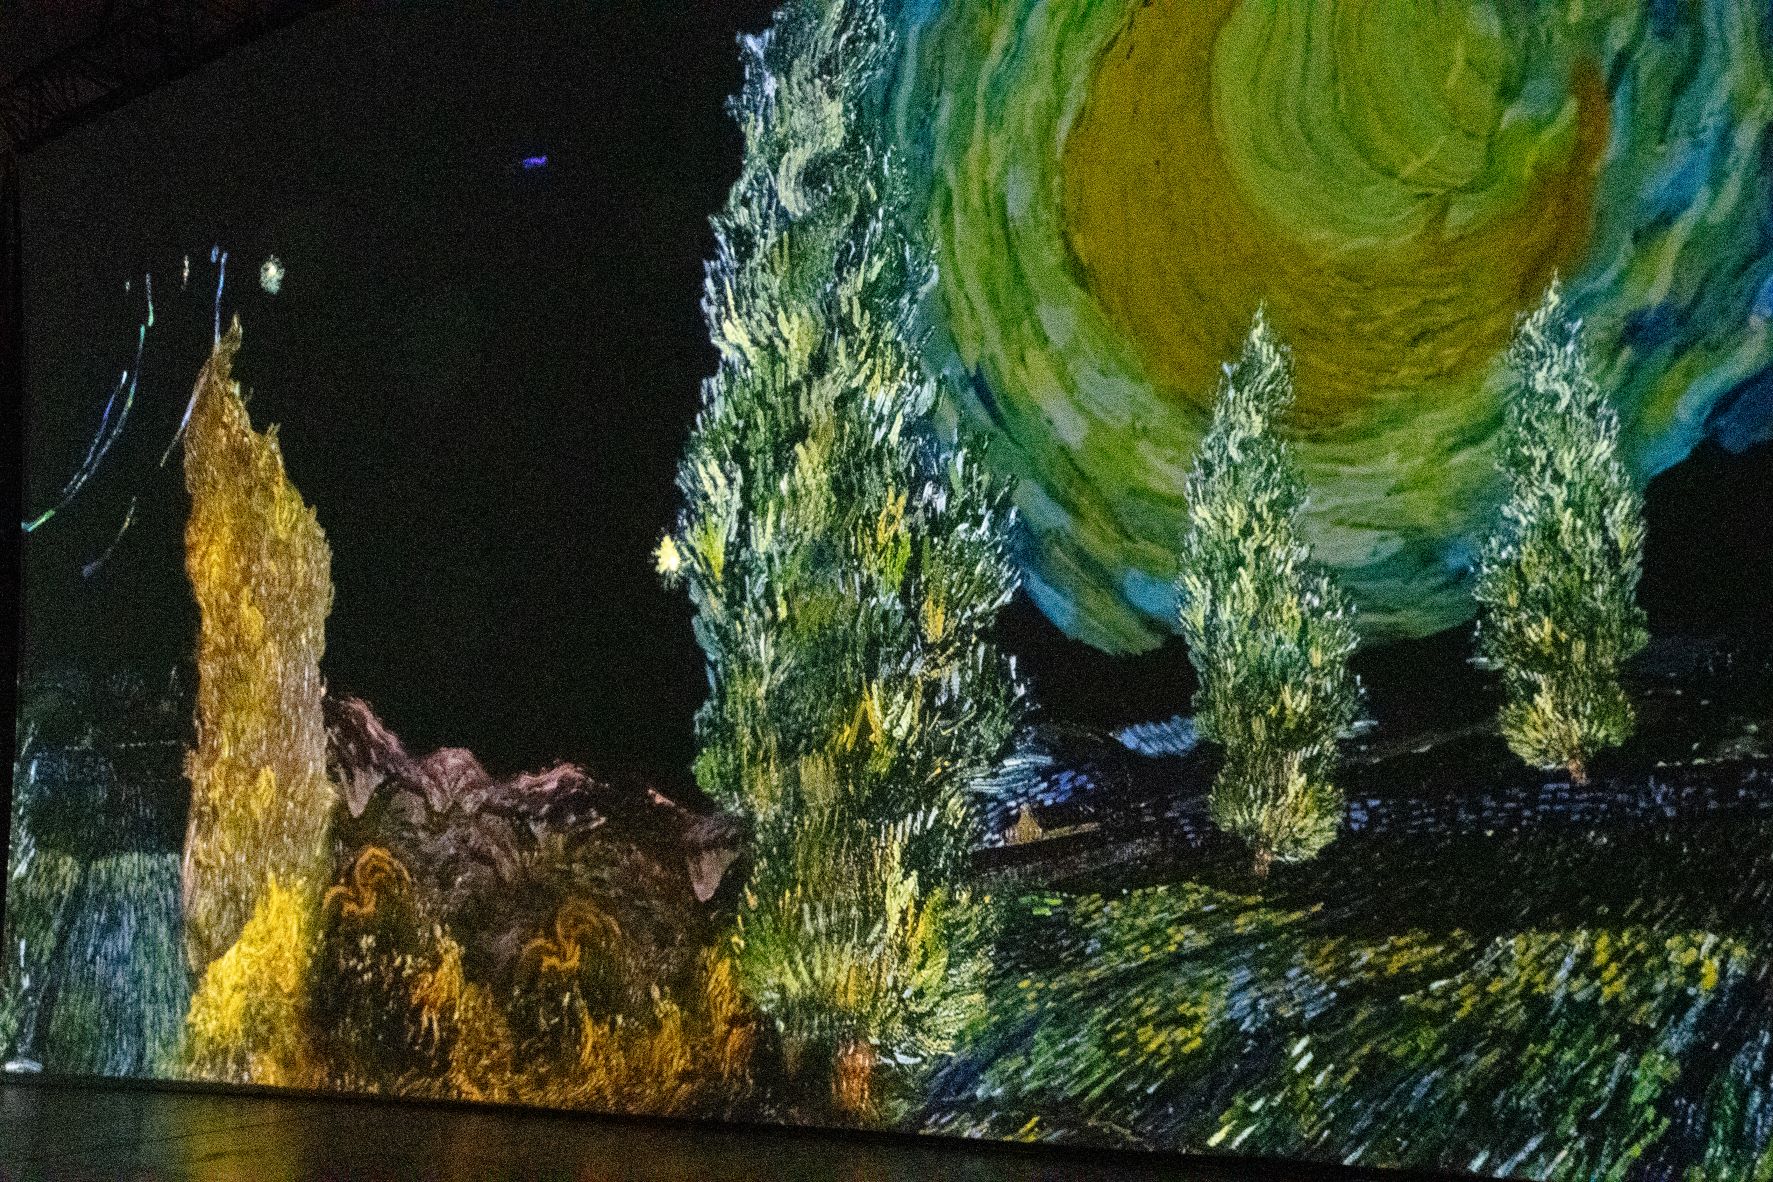 Beyond Van Gogh Immersive exhibit. It's a multimedia production, one that takes familiar images of Van Gogh's paintings and blows them up into light projections and timed to music.